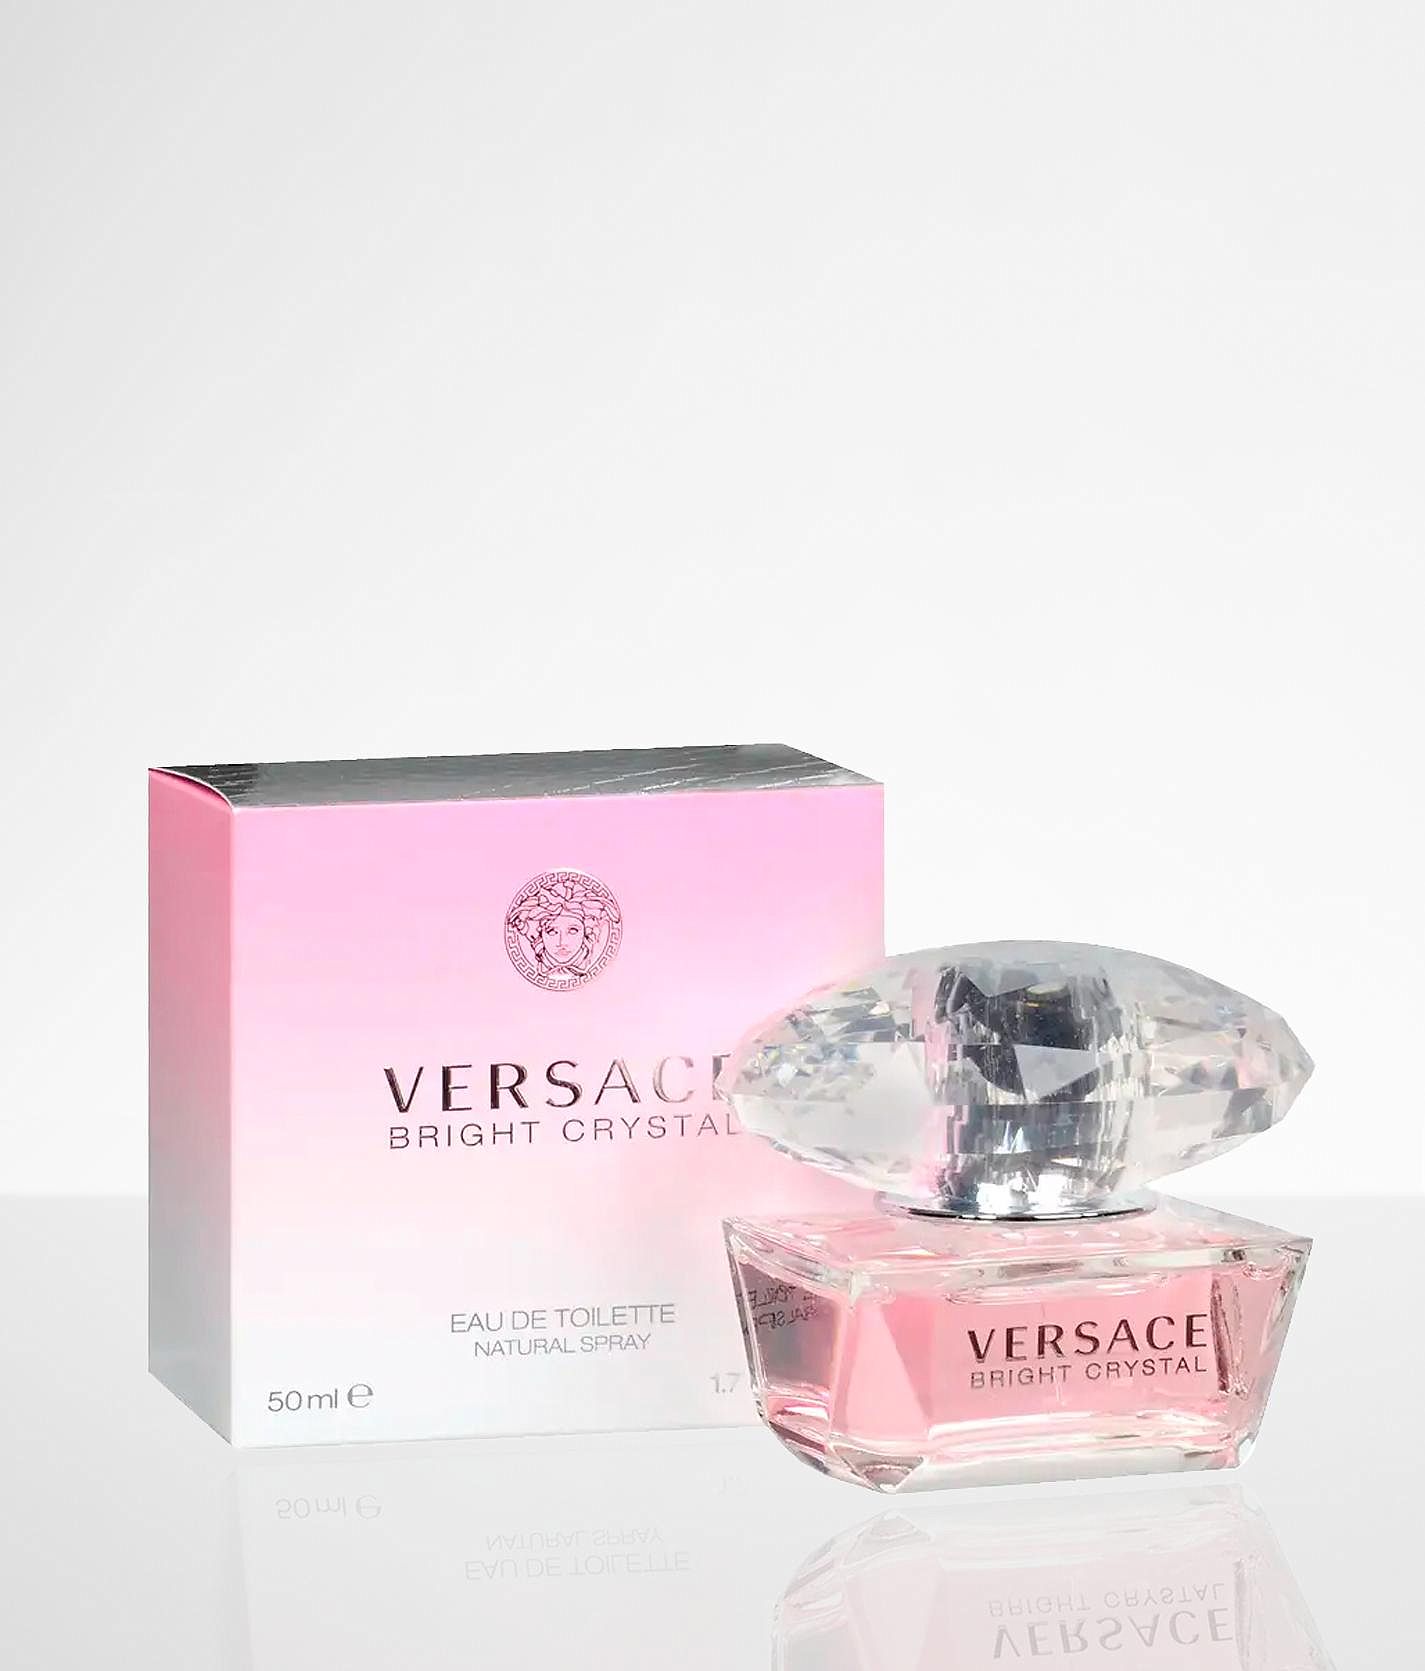 Fruity Magnolia Inspired by Versace's Bright Crystal Eau de Parfum, Perfume for Women. Size: 50ml / 1.7oz, Size: 50 ml